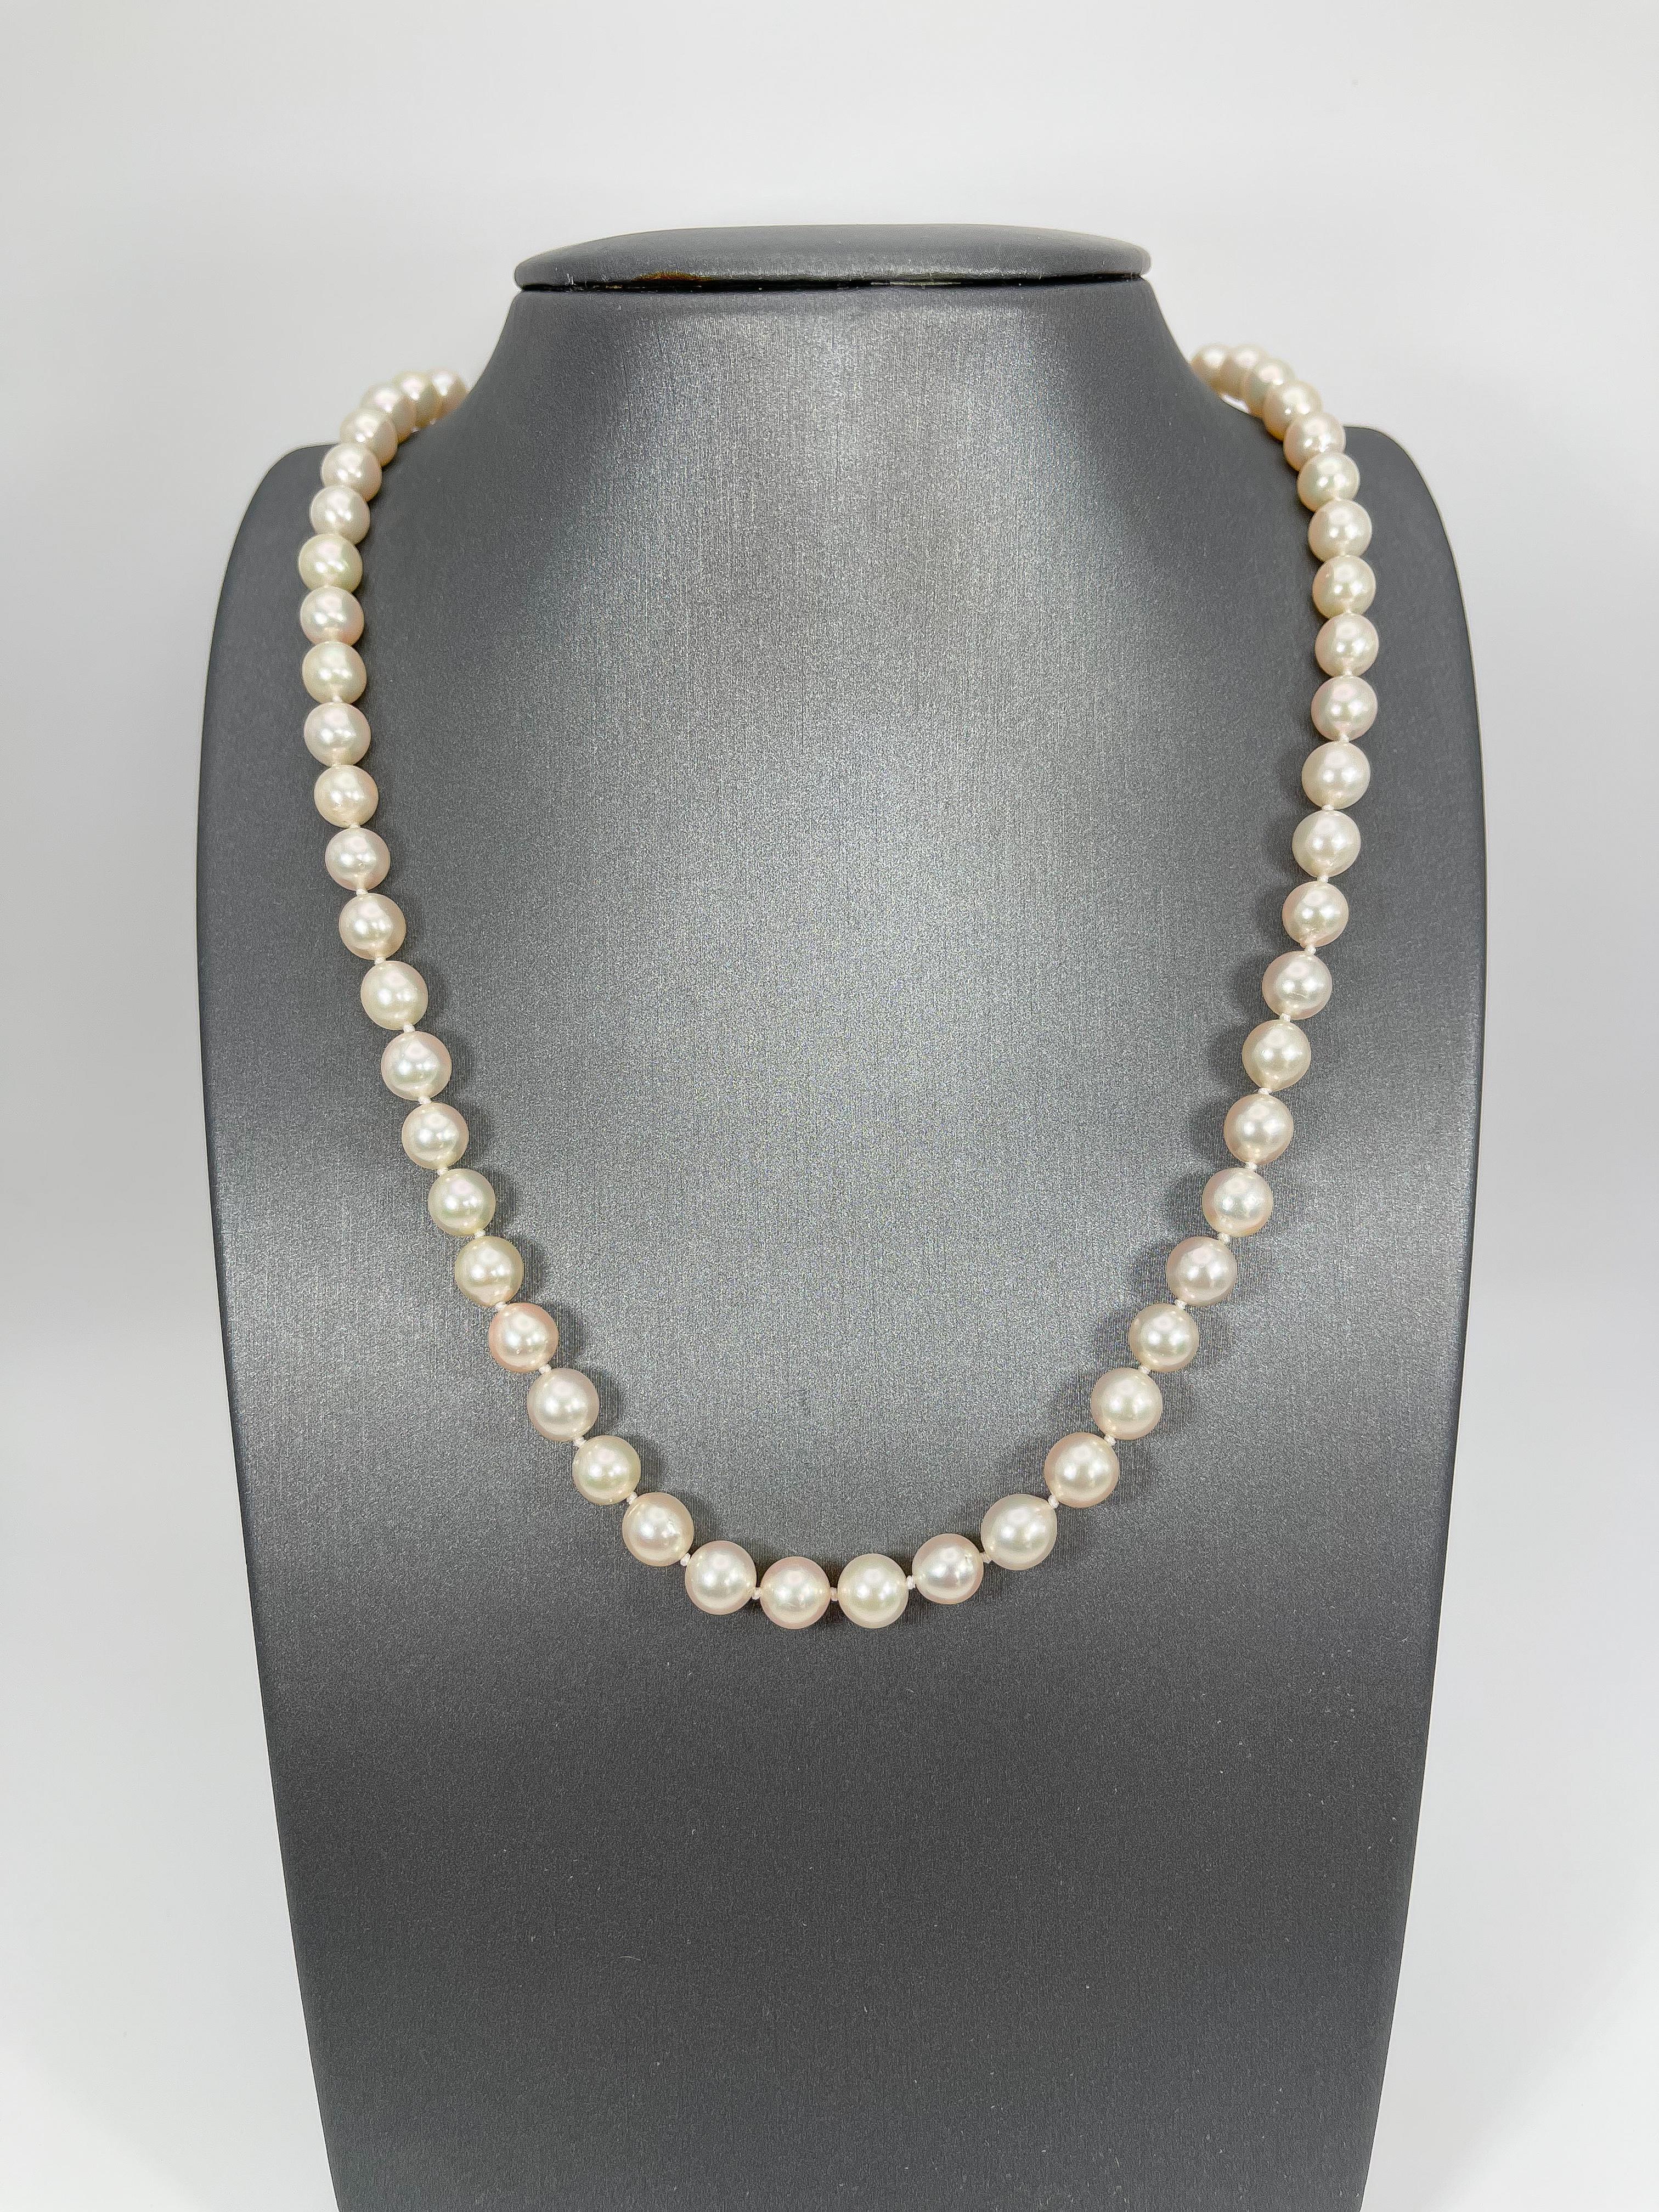 White pearl strand necklace with platinum diamond pearl clasp. The diamonds in the clasp are all round, the length of this necklace is 18 inches, the width is 7 mm, and it has a total weight of 28.24 grams.